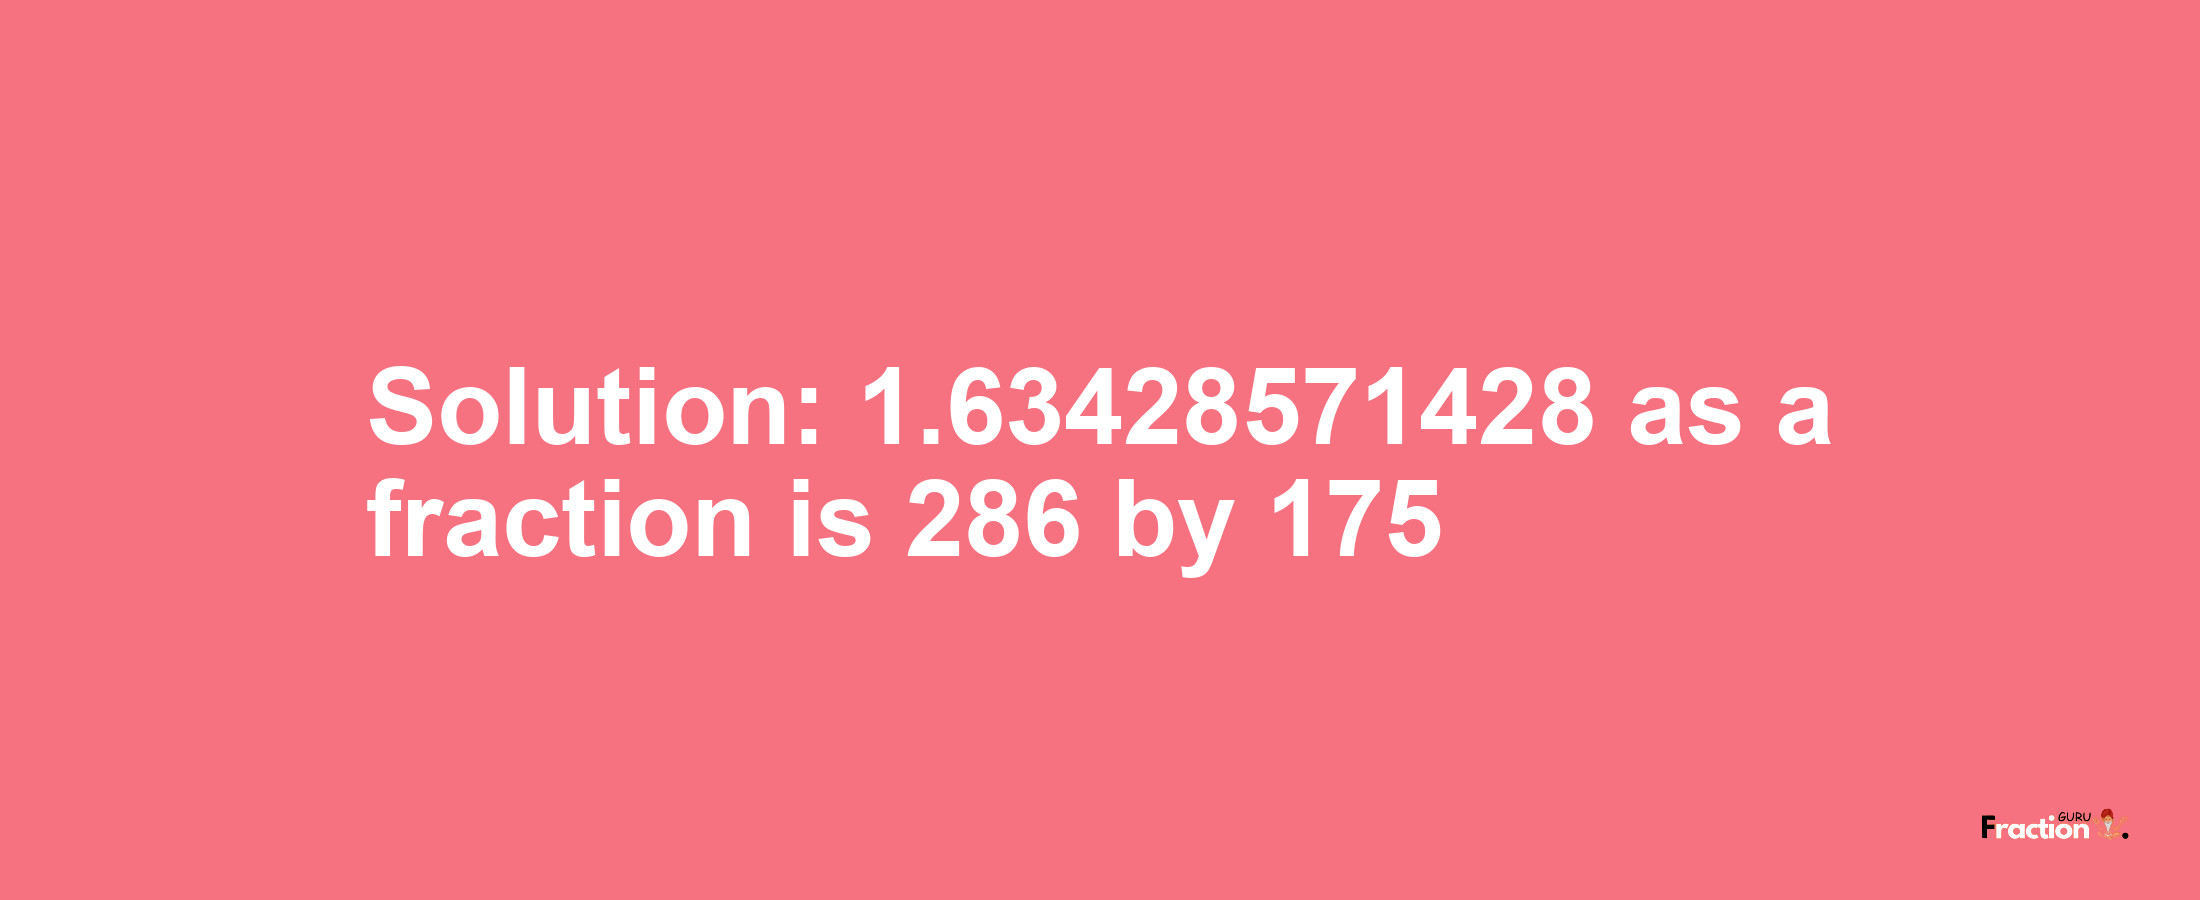 Solution:1.63428571428 as a fraction is 286/175